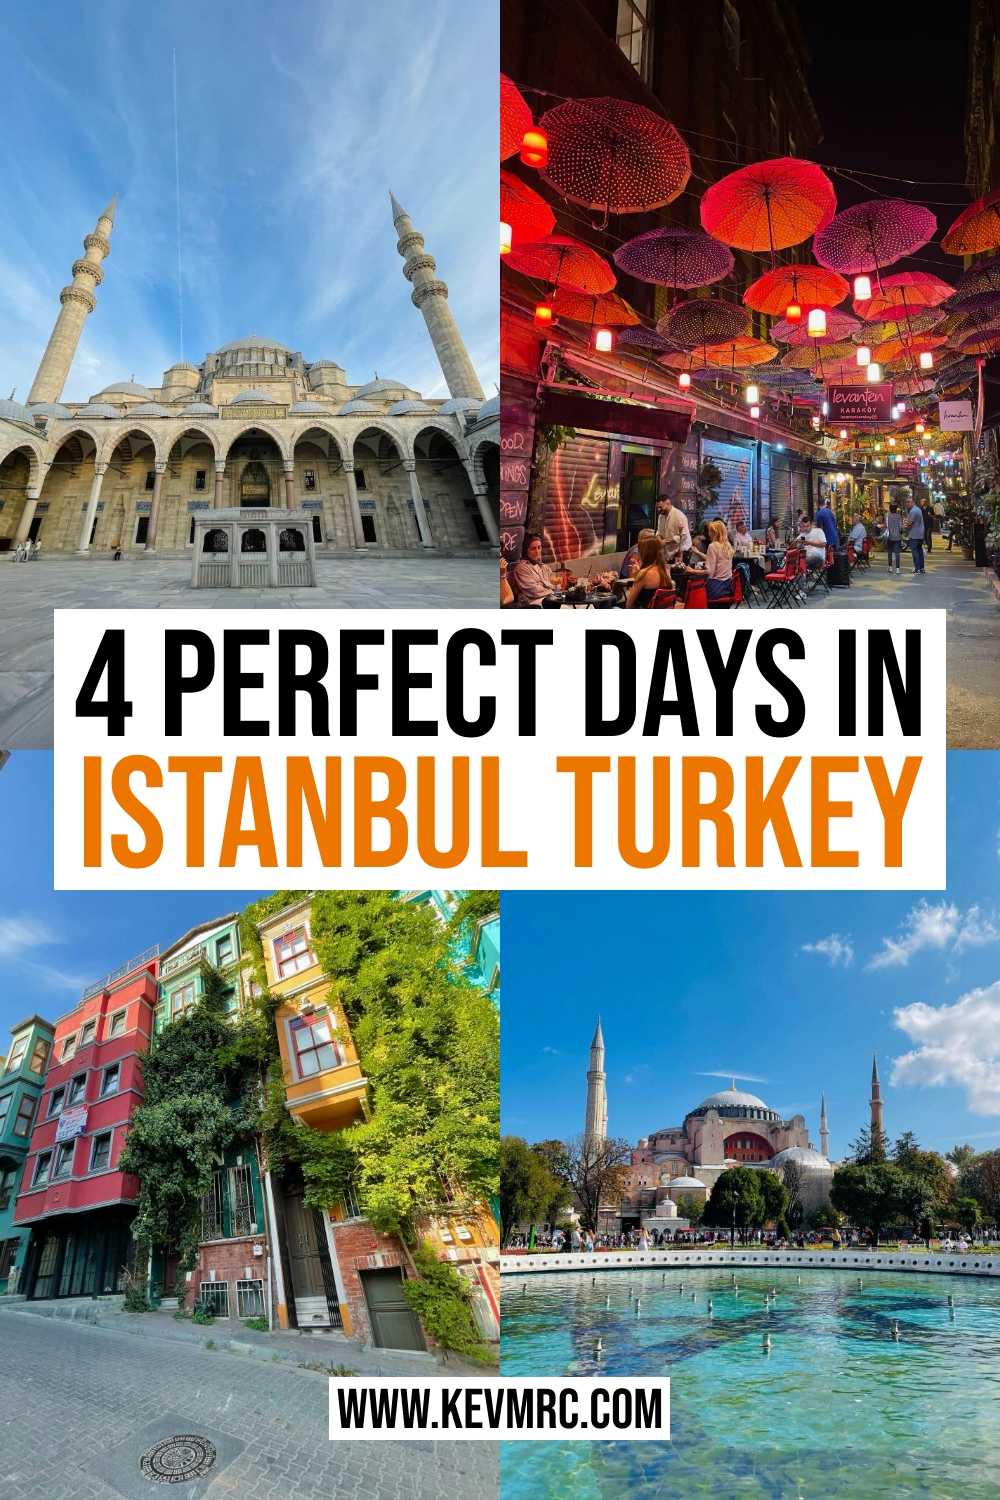 I’ve crafted a detailed 4 days in Istanbul itinerary for you to soak up the best of the city. Complete with an easy-to-use map and pro tips, you’ll navigate the city like no other. istanbul turkey | istanbul itinerary travel guide | istanbul travel guide